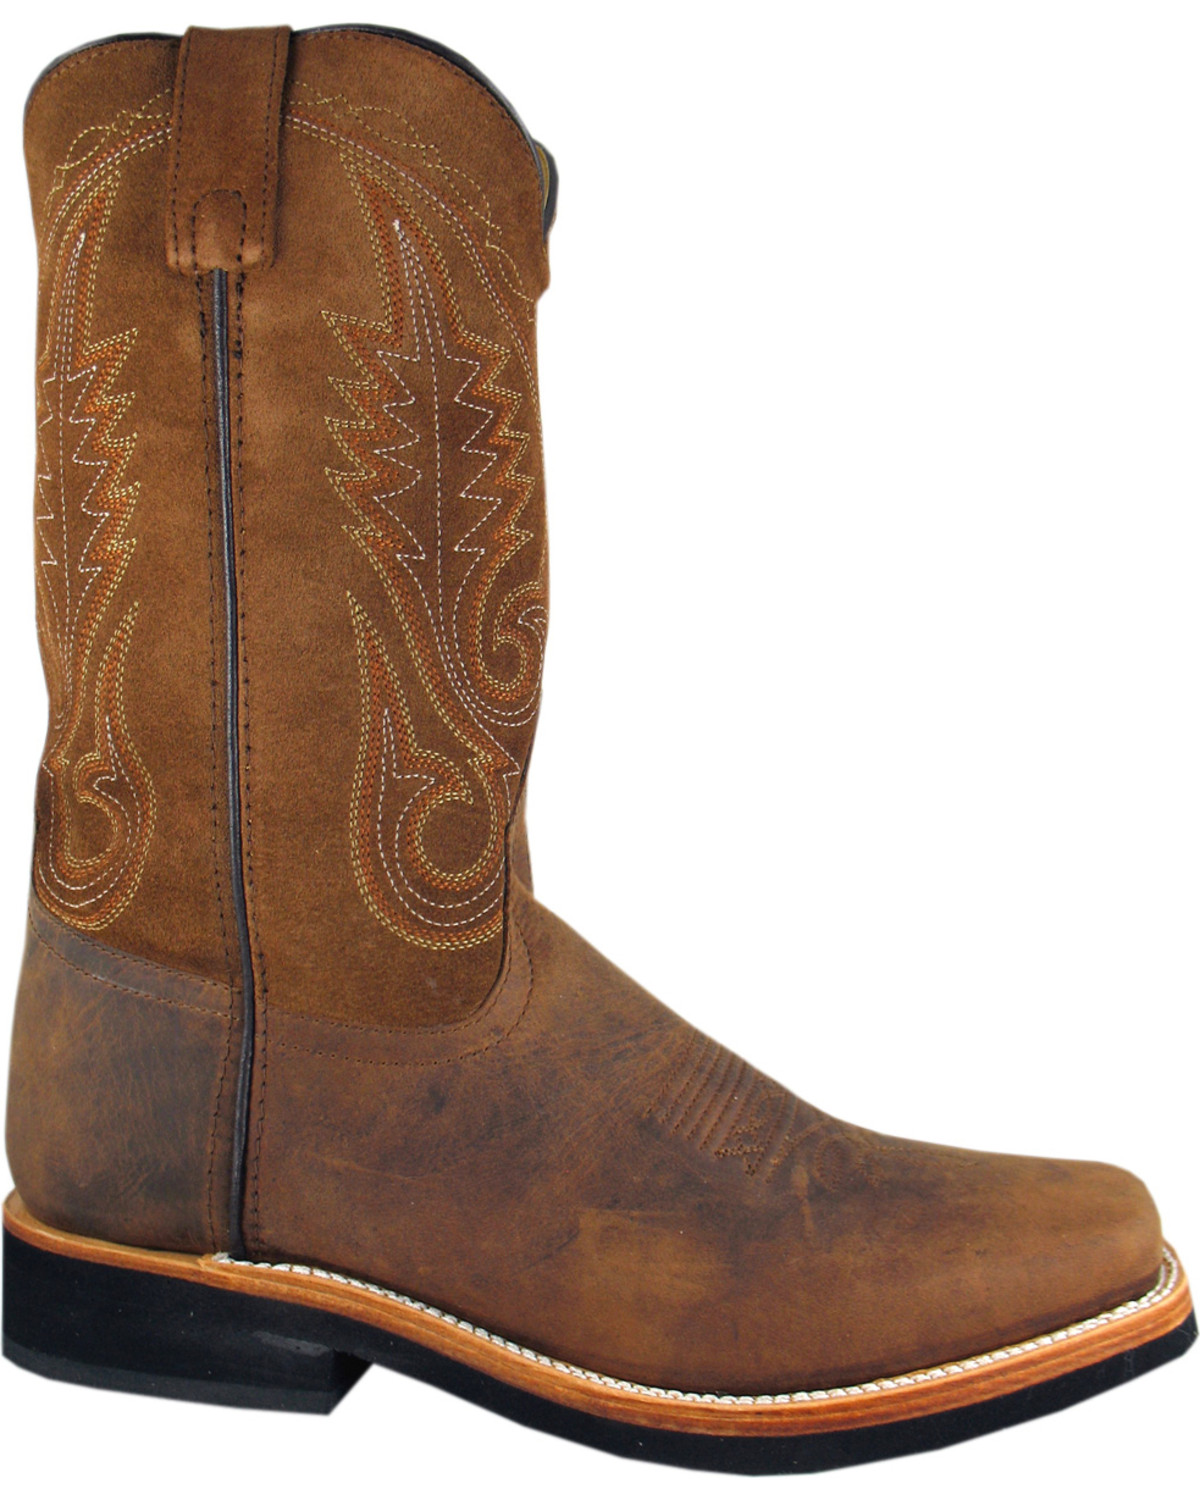 Smoky Mountain Men's Boonville Western Boots - Square Toe